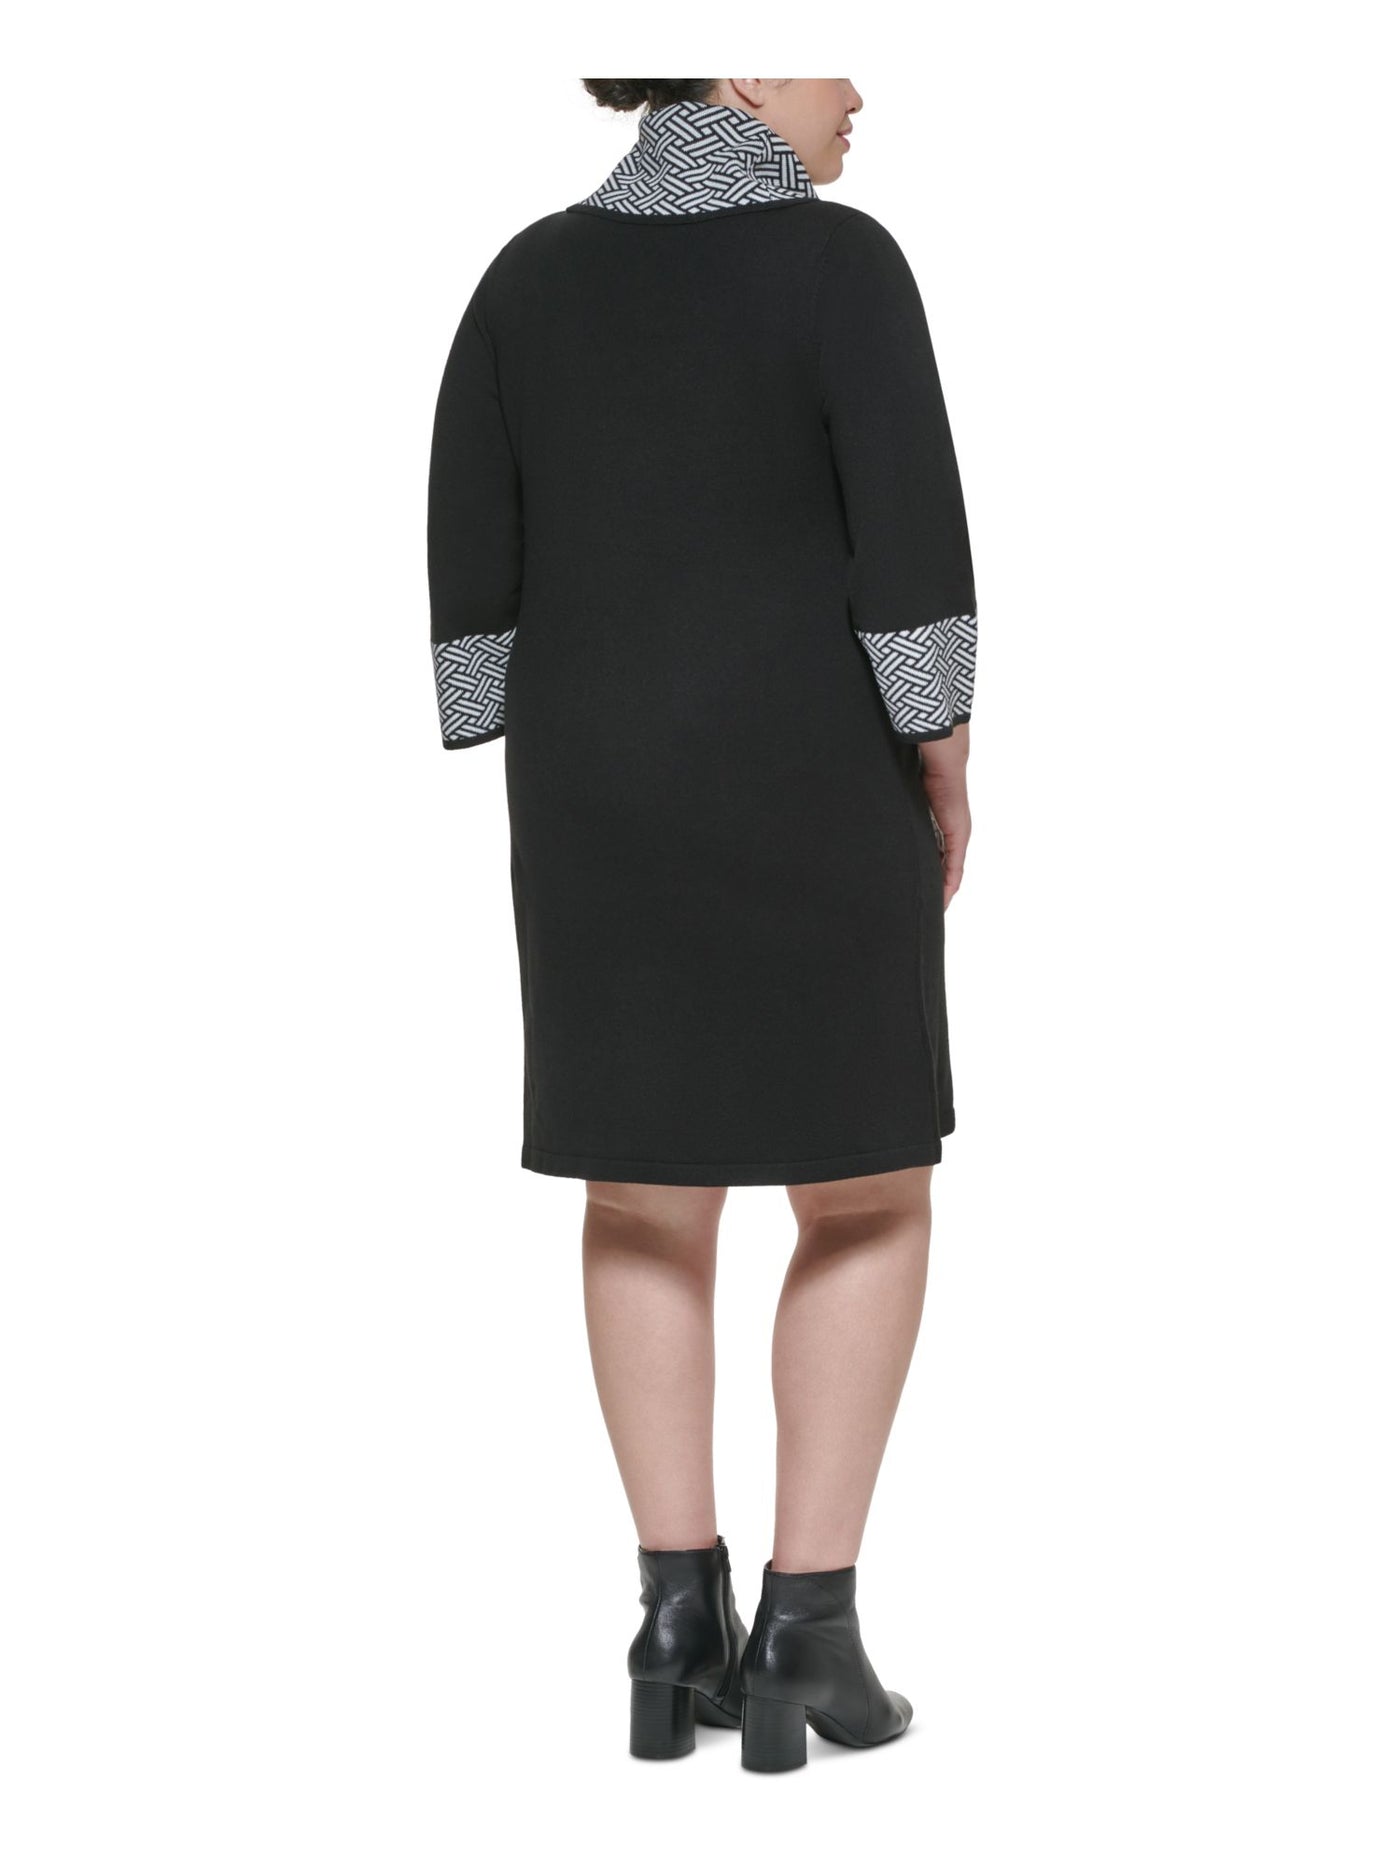 JESSICA HOWARD Womens Black Knit 3/4 Sleeve Cowl Neck Above The Knee Sweater Dress Plus 2X